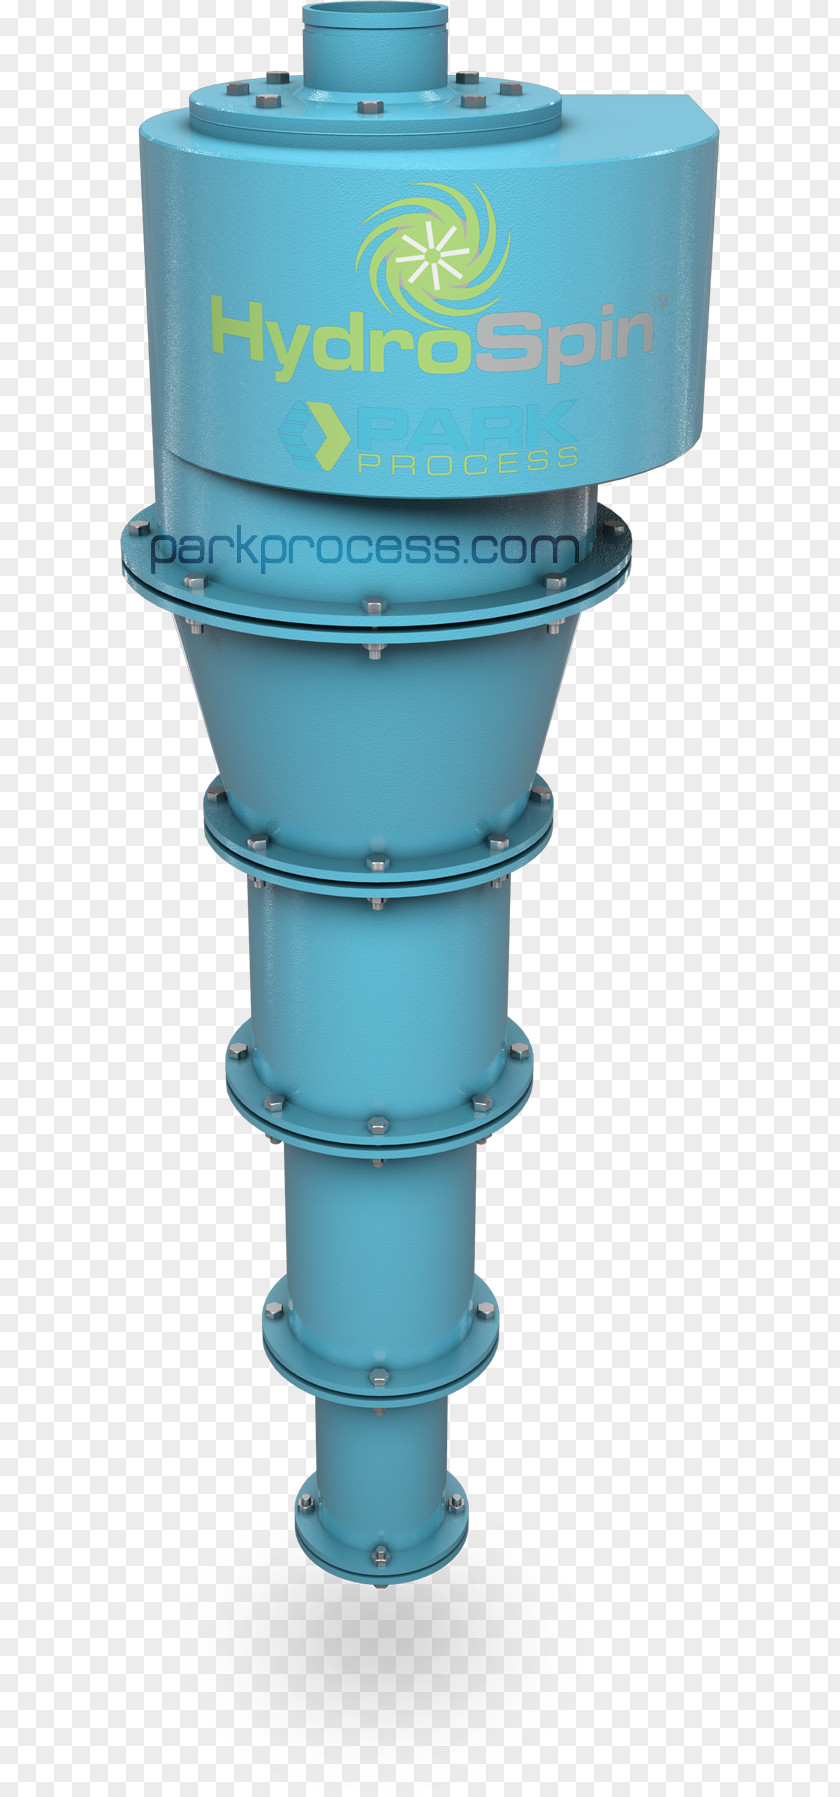 Seperation Hydrocyclone Cylinder Water Separation Process PNG